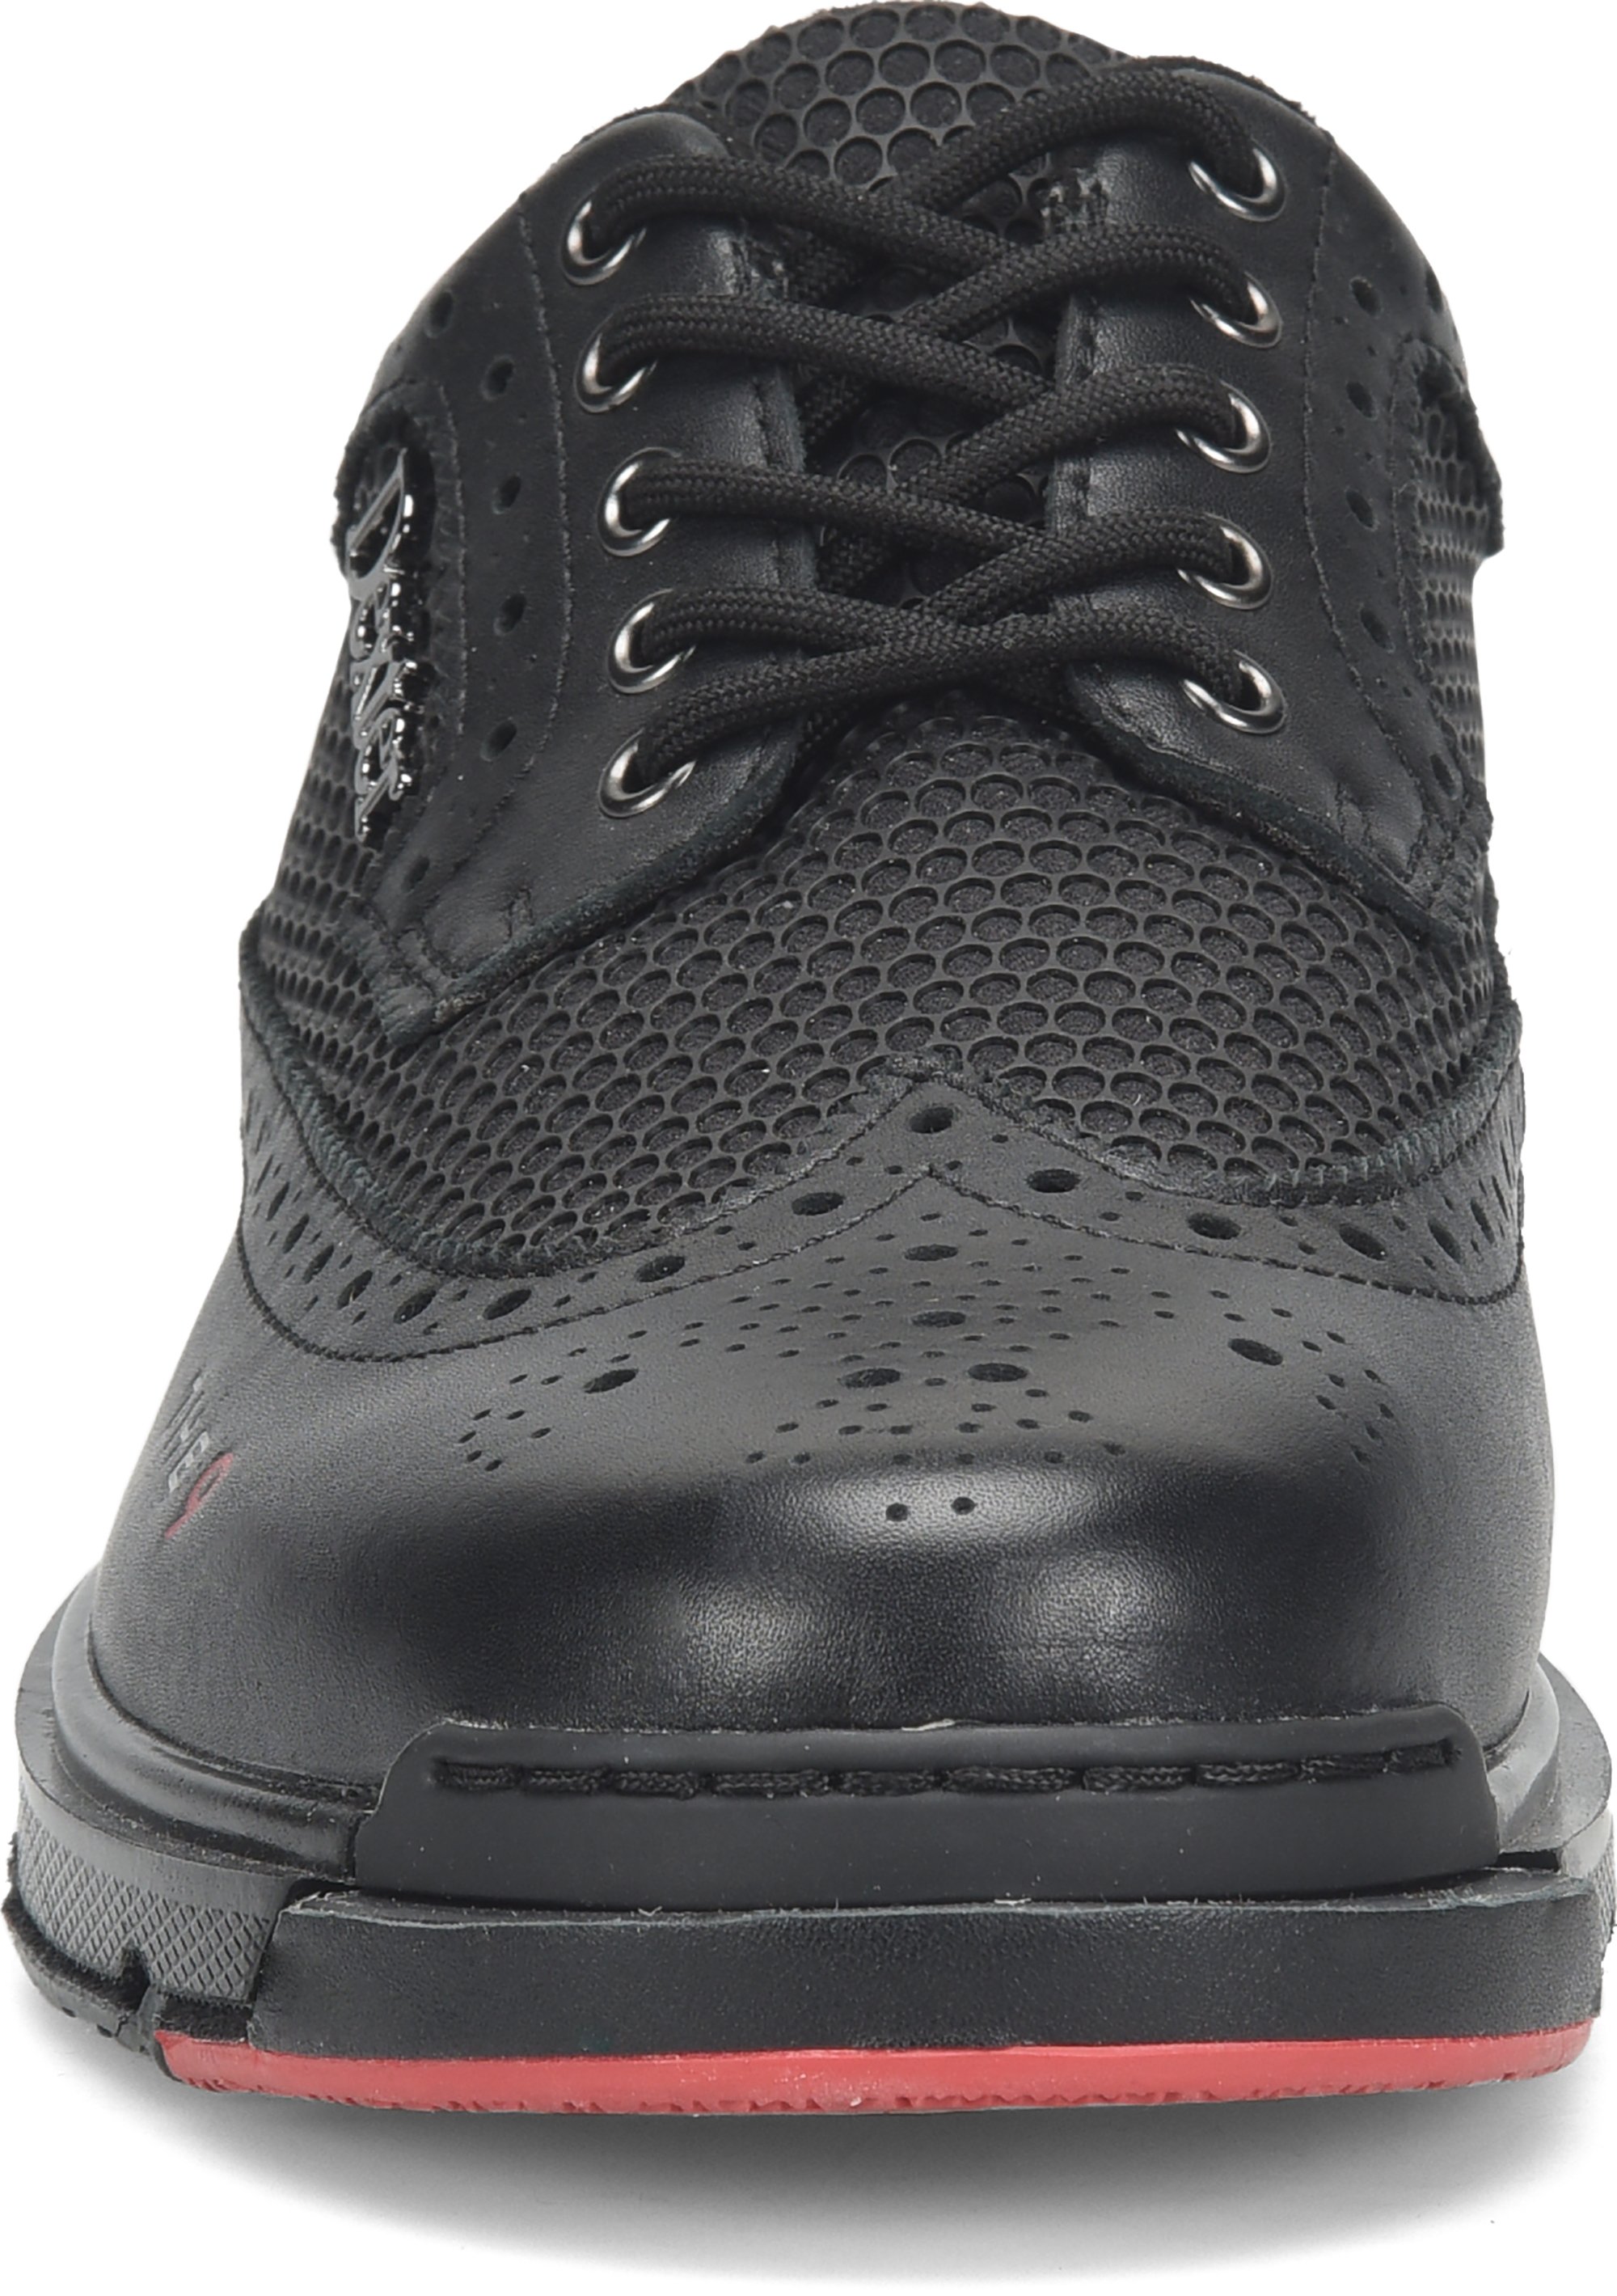 Dexter Mens THE 9 WT Black Bowling Shoes + FREE SHIPPING